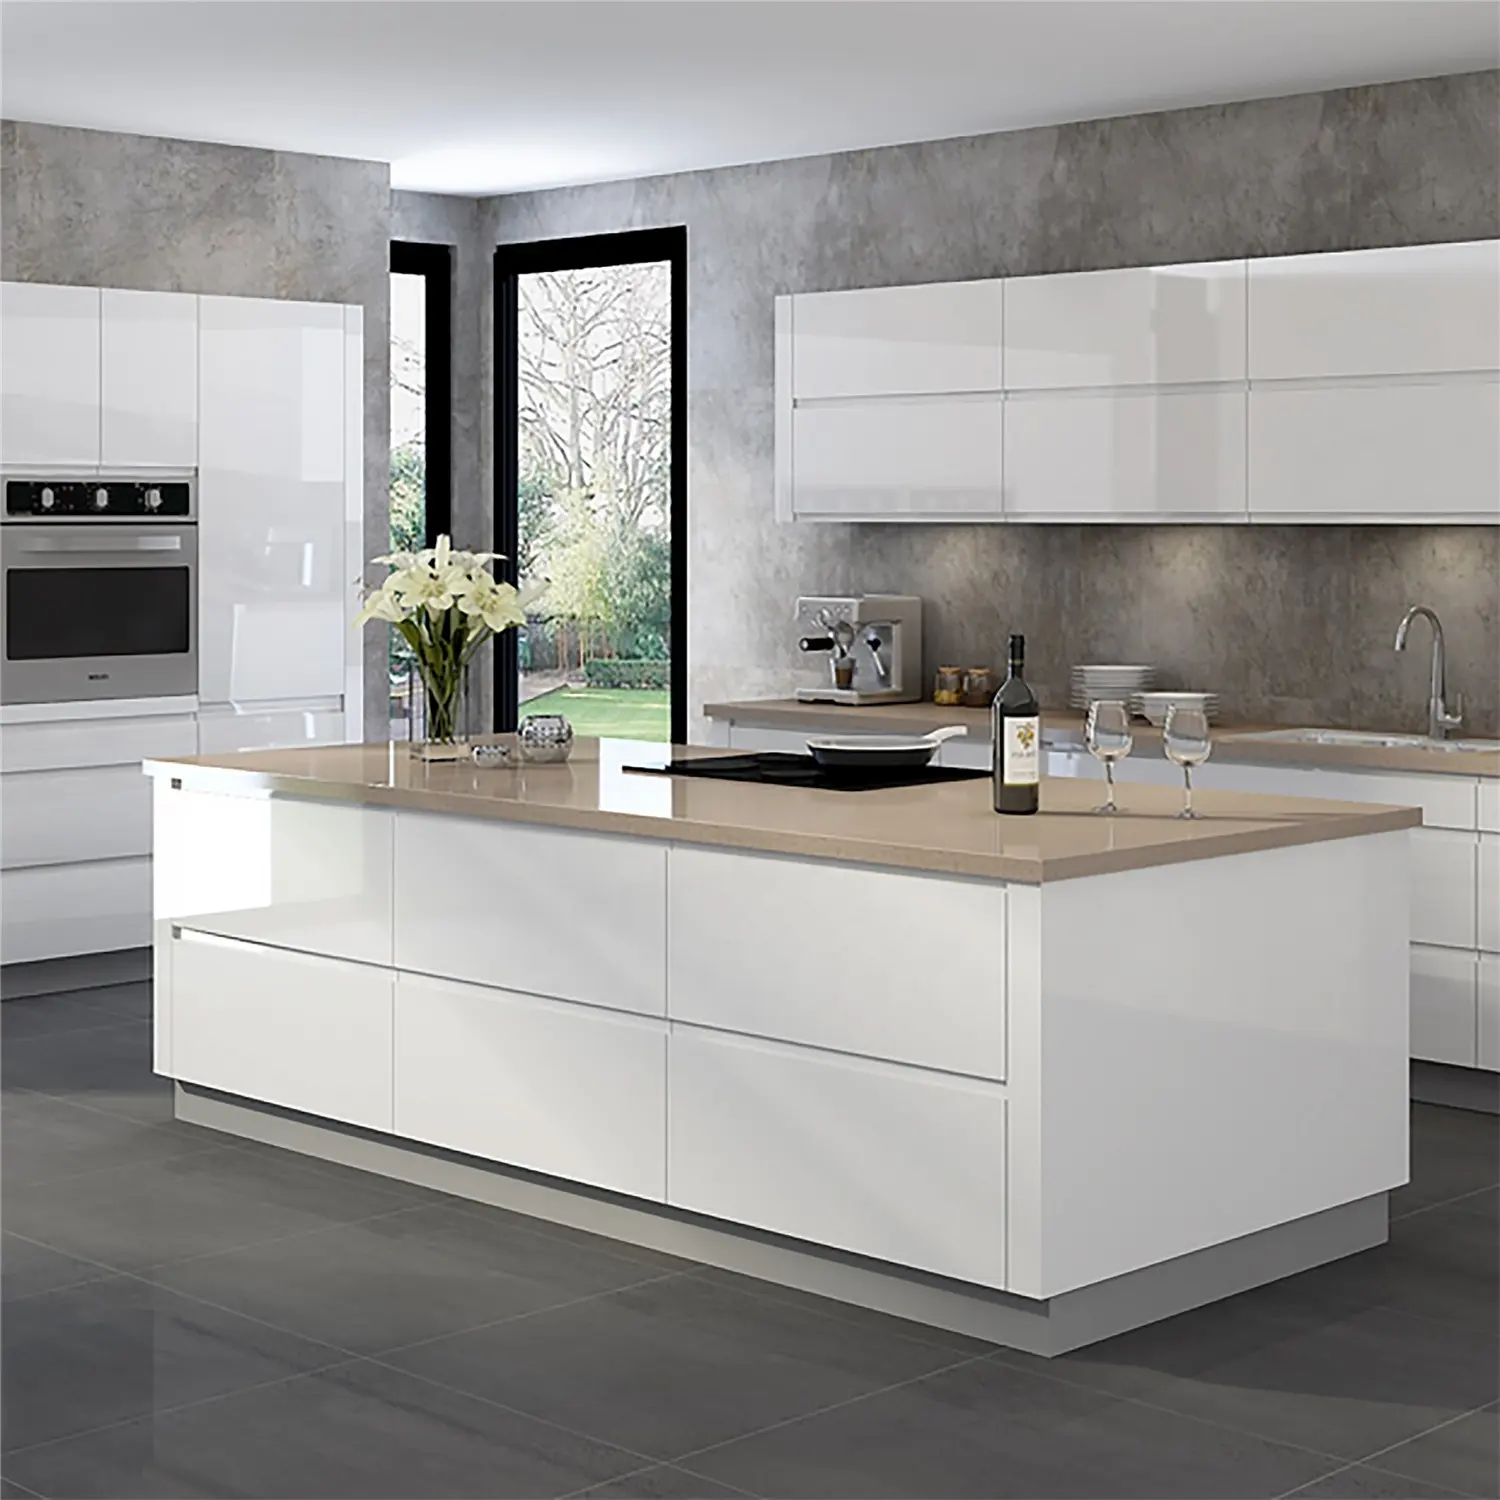 Vermonhouzz Hot Selling Modular MDF Lacquer White Concealed Handle Kitchen Cabinets With BIg Island